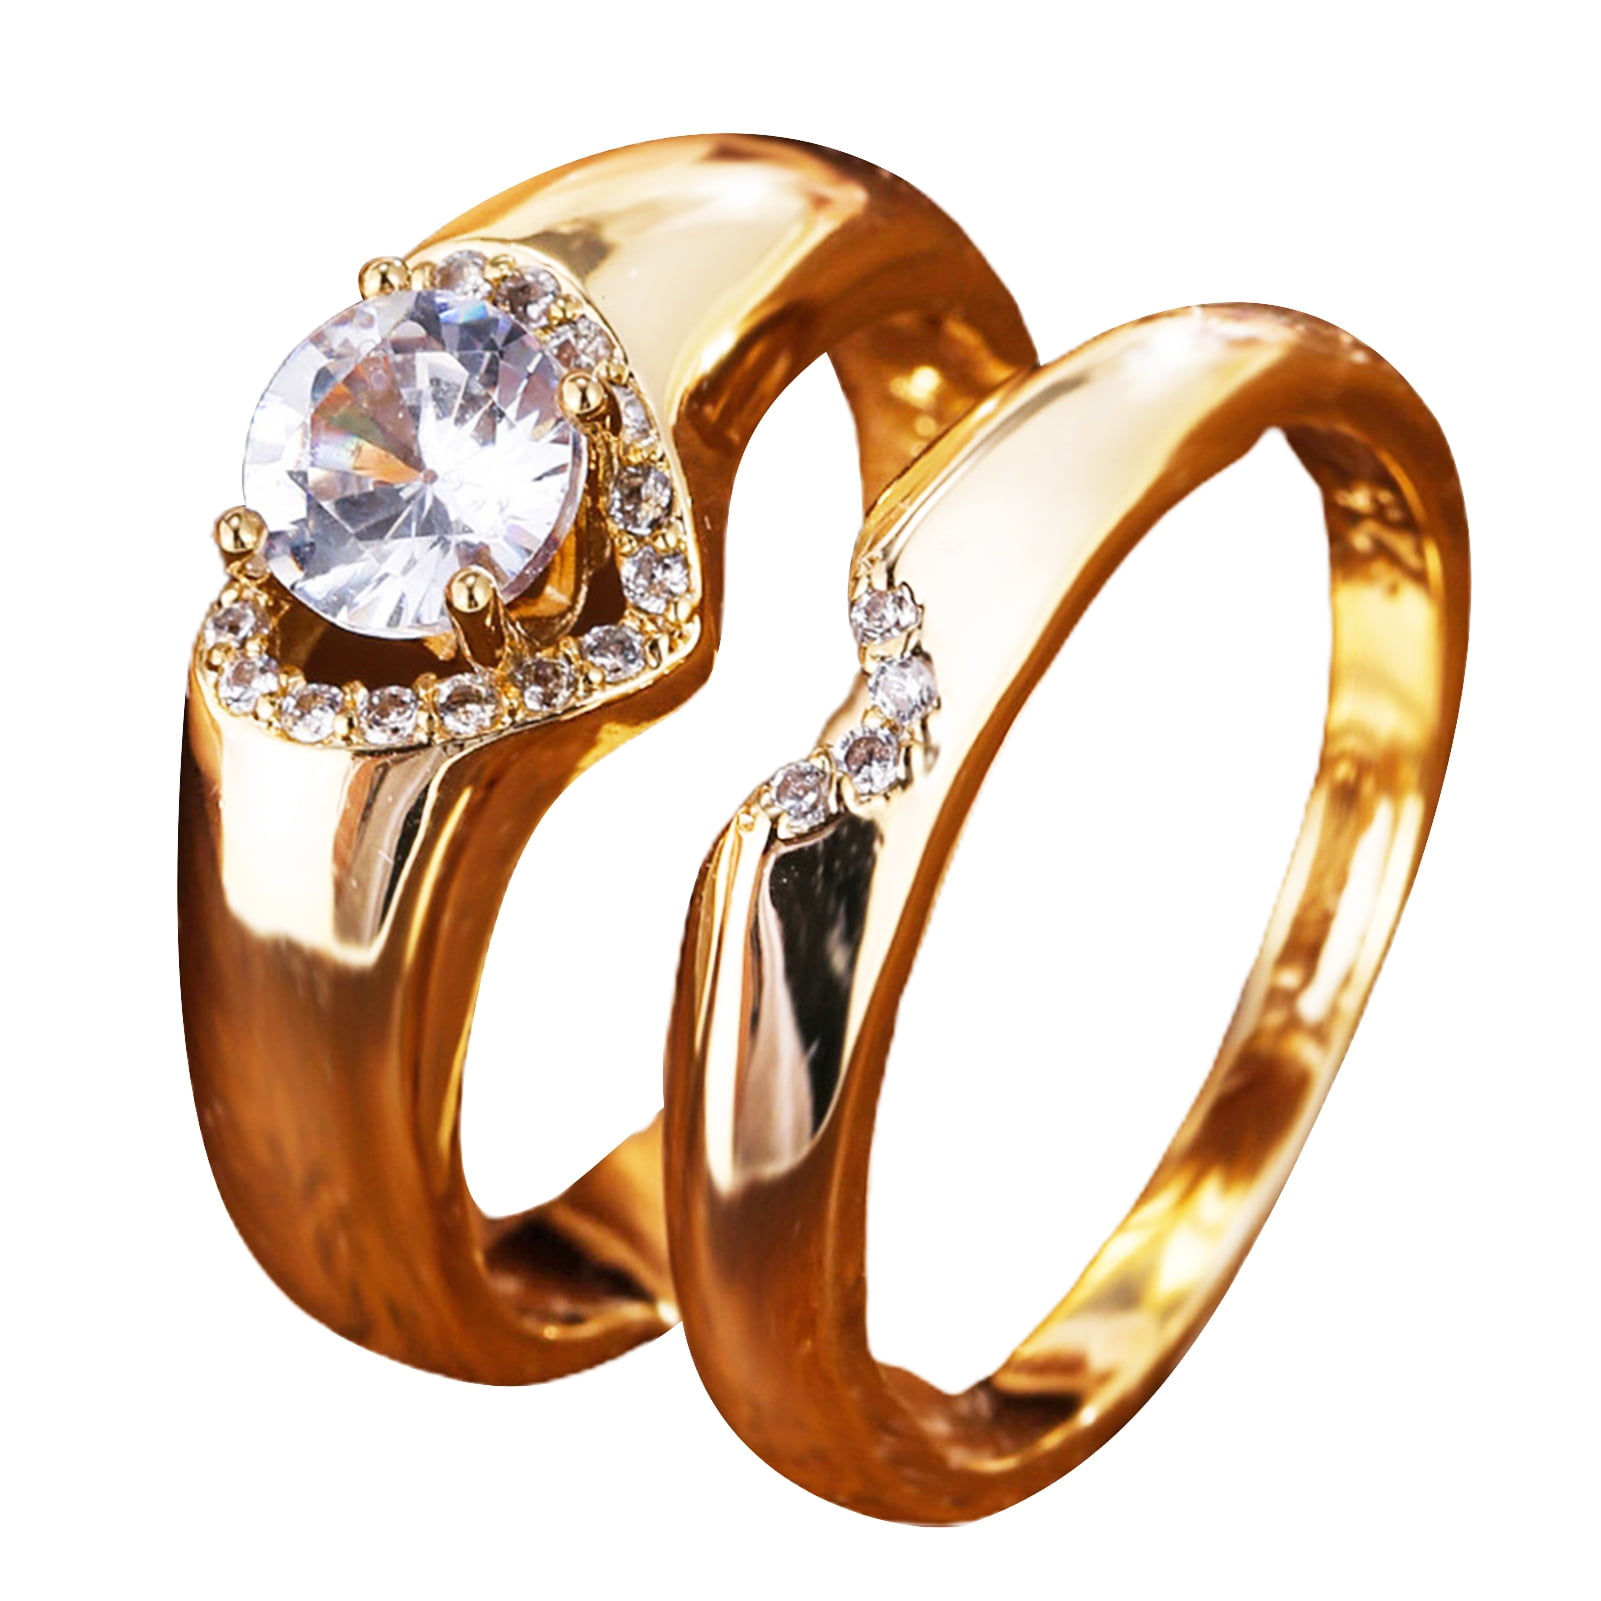 Showroom of 22 ct gold couple ring for engagement | Jewelxy - 136661